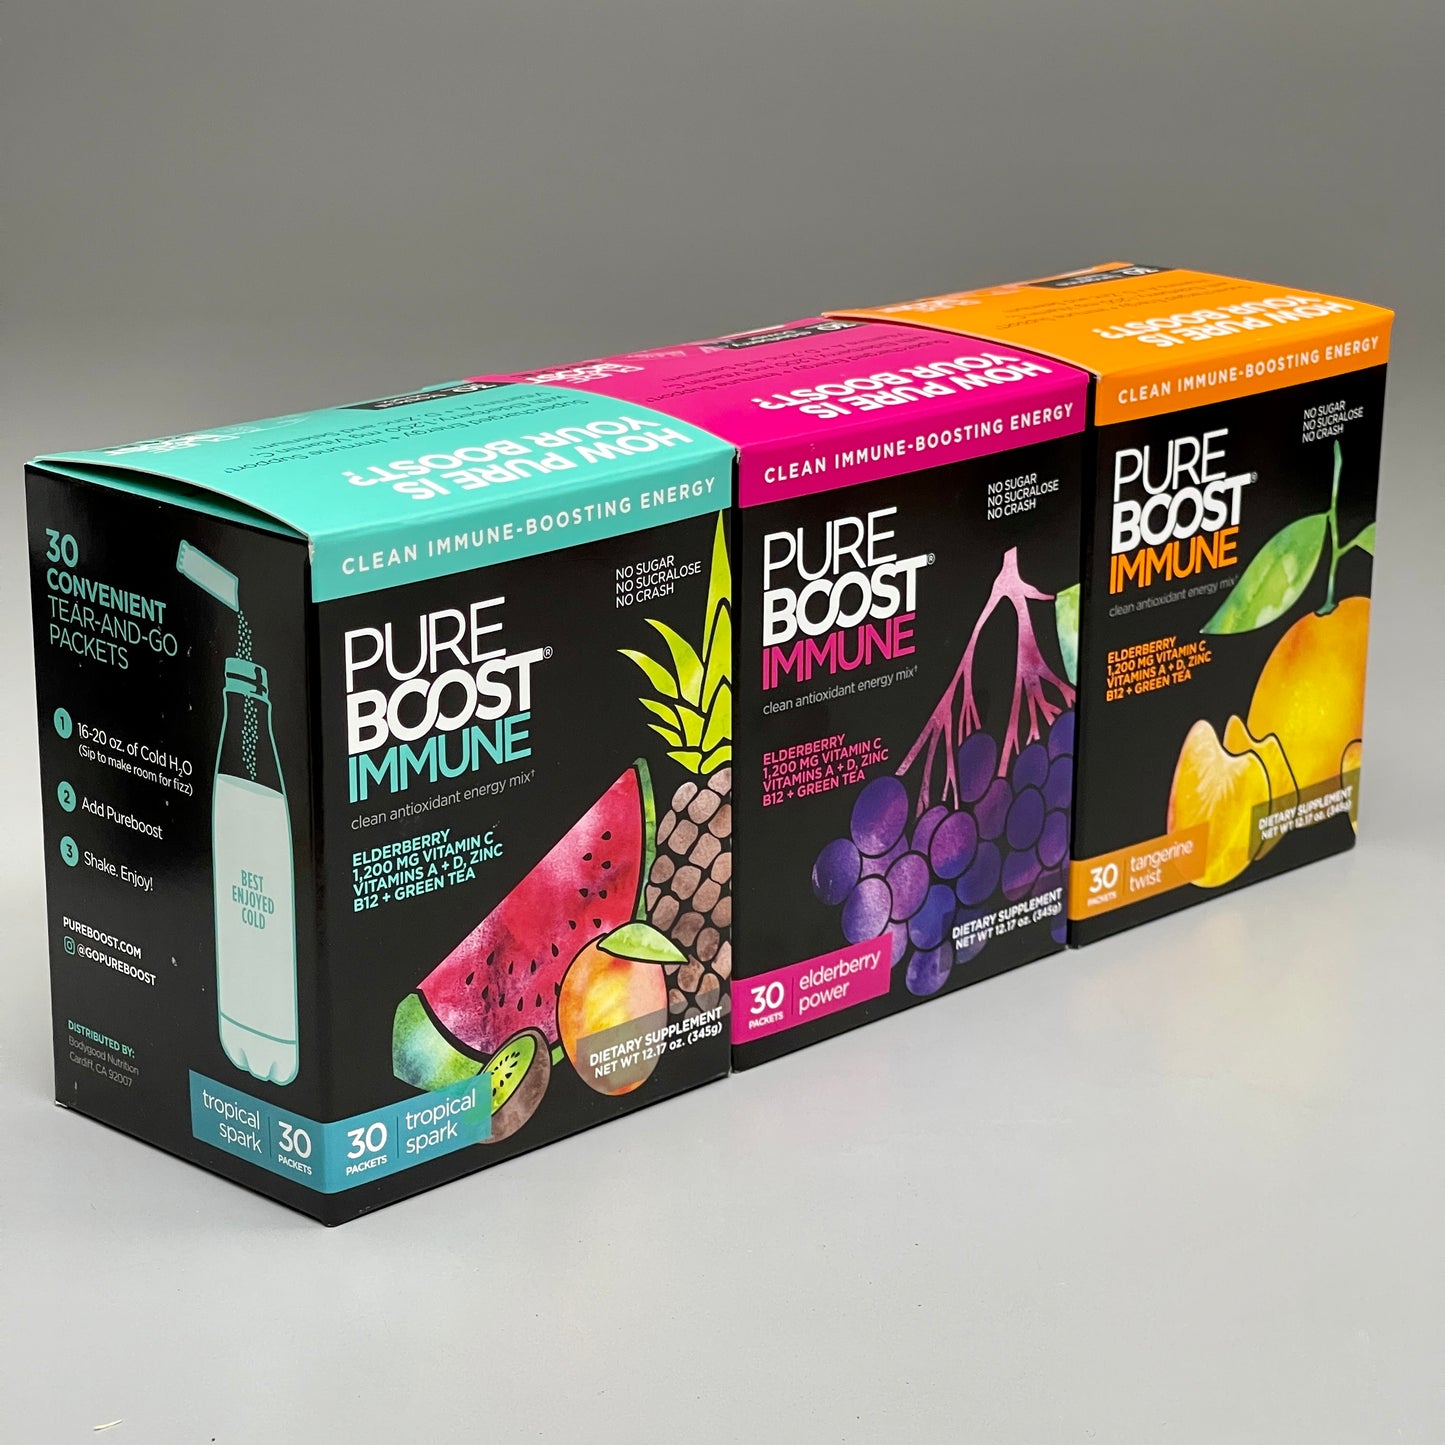 PUREBOOST IMMUNE 3-PACK of Clean Antioxidant Boosting Energy Mix (New)